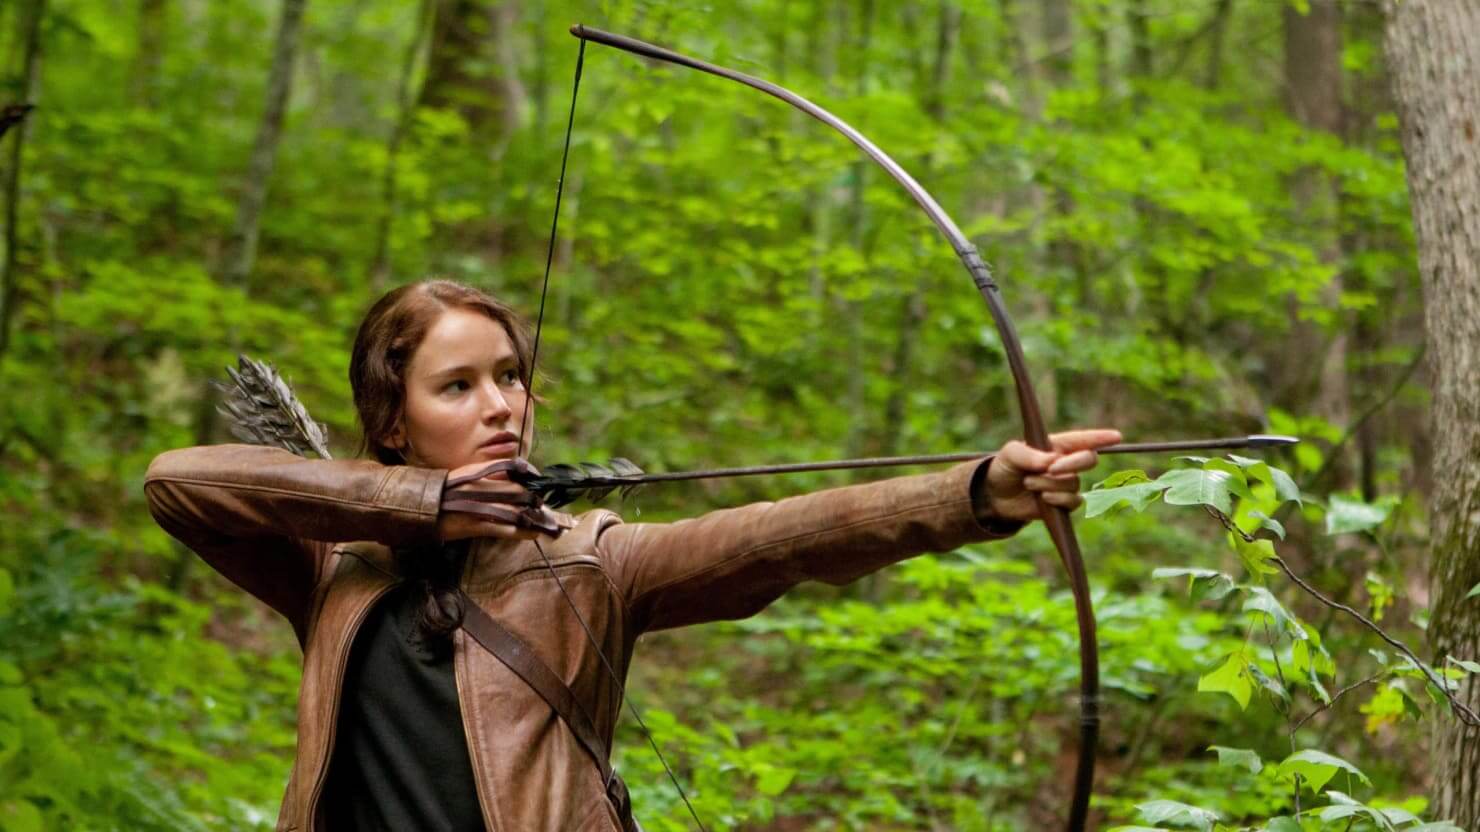 Catniss from the Hunger Games with an arrow knocked